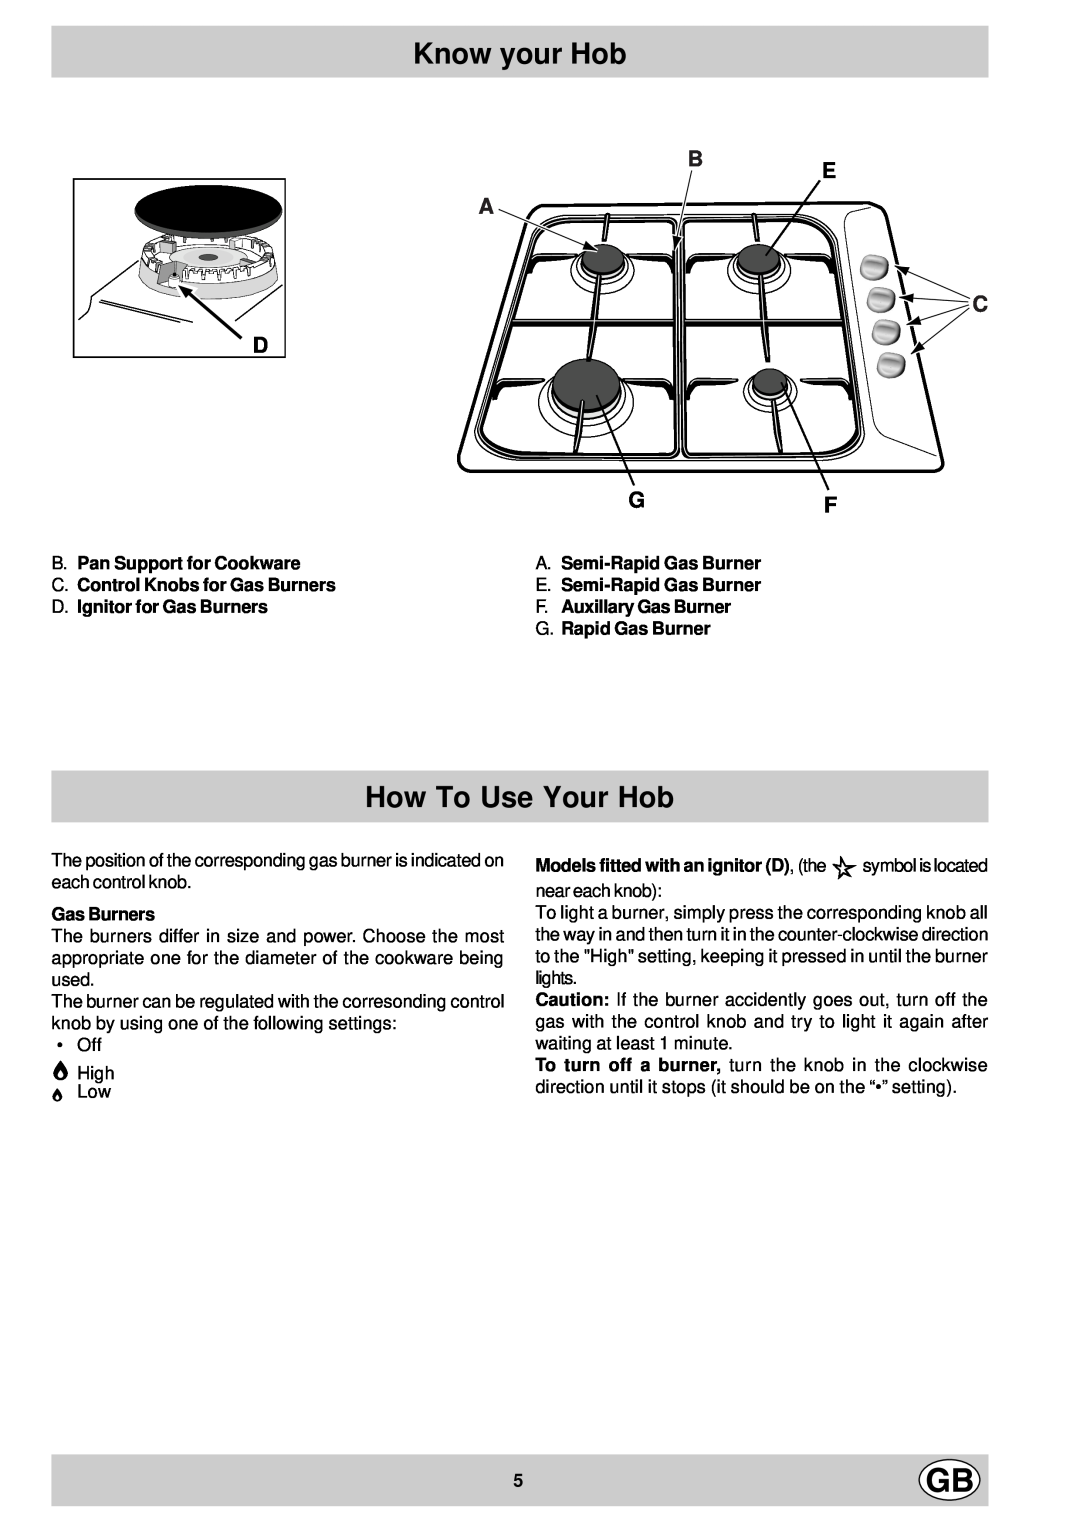 Hotpoint G640 manual Know your Hob, How To Use Your Hob, B. Pan Support for Cookware, A. Semi-Rapid Gas Burner, Gas Burners 